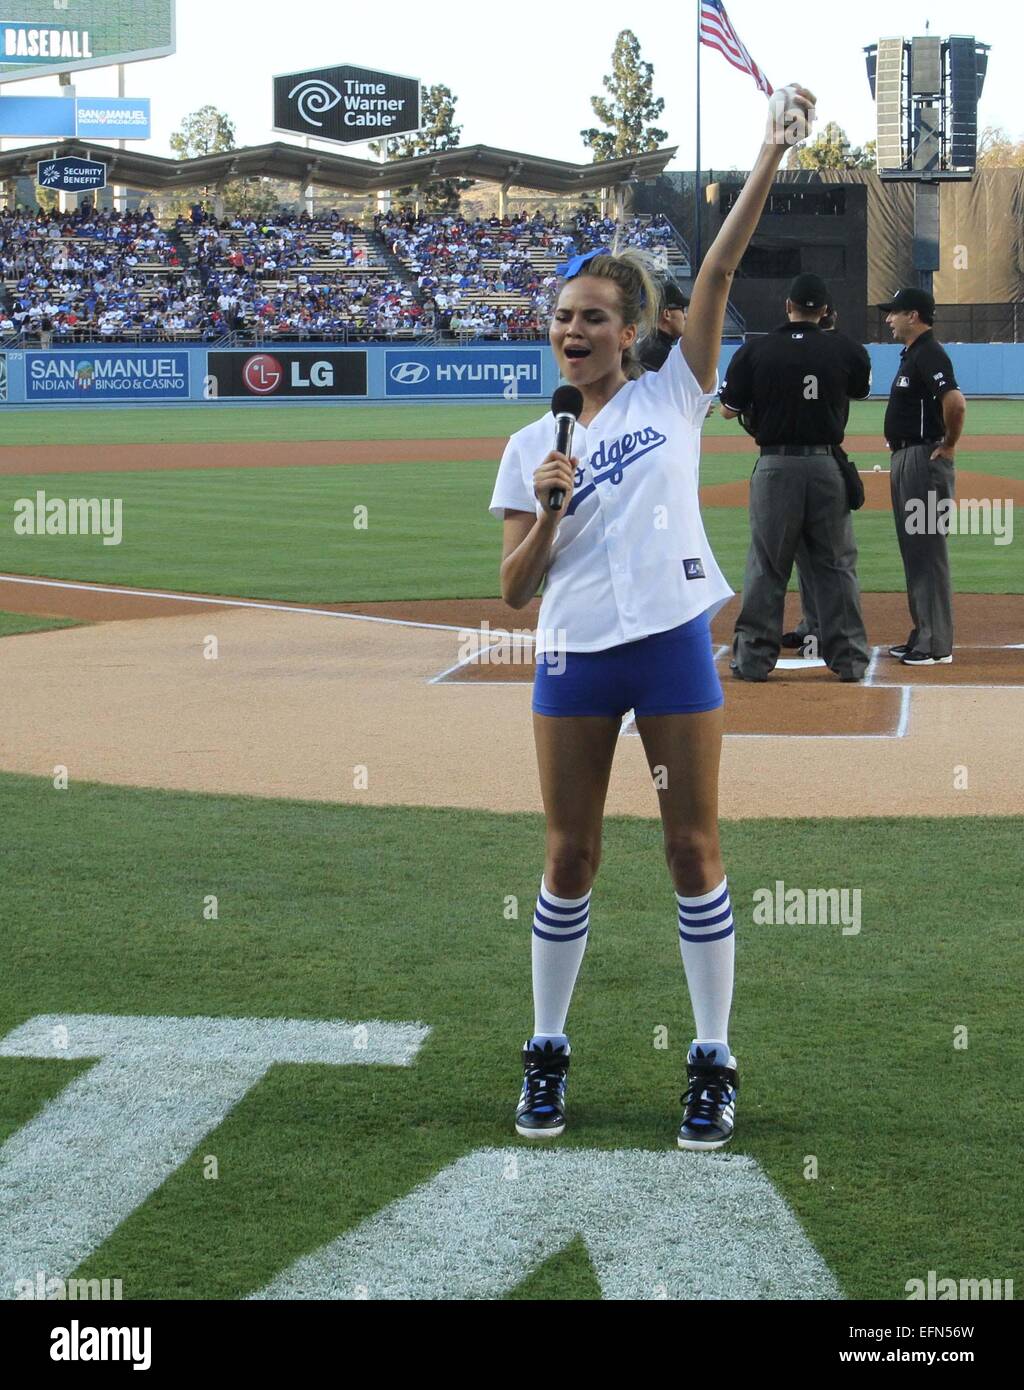 Celebrities watch the Los Angeles Dodgers v Los Angeles Angels baseball game  at Dodger Stadium. The Dodgers defeated the Angels by a final score of 5-4.  Featuring: Chrissy Teigen Where: Los Angeles